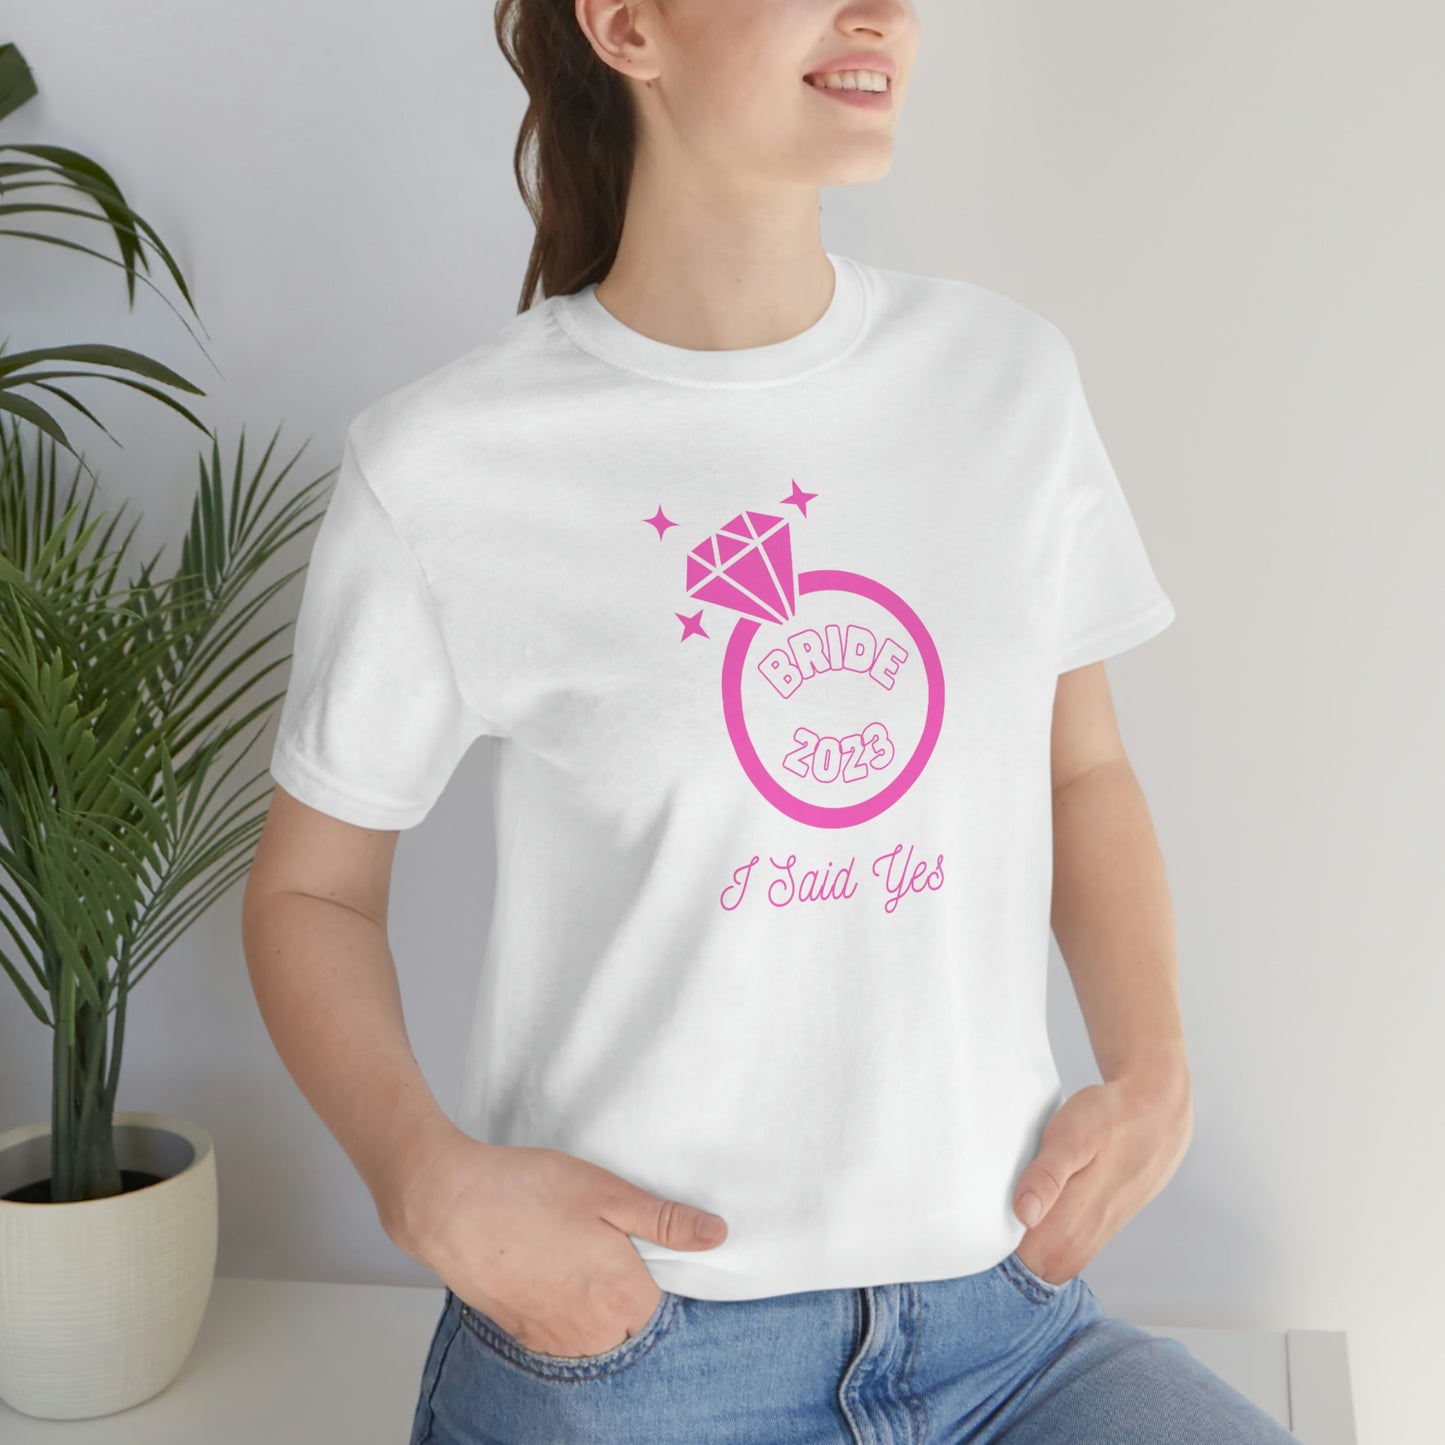 I Said Yes Bride 2023 Engagement Pink Diamond Ring Unisex Jersey Short Sleeve Tee Small-3XL